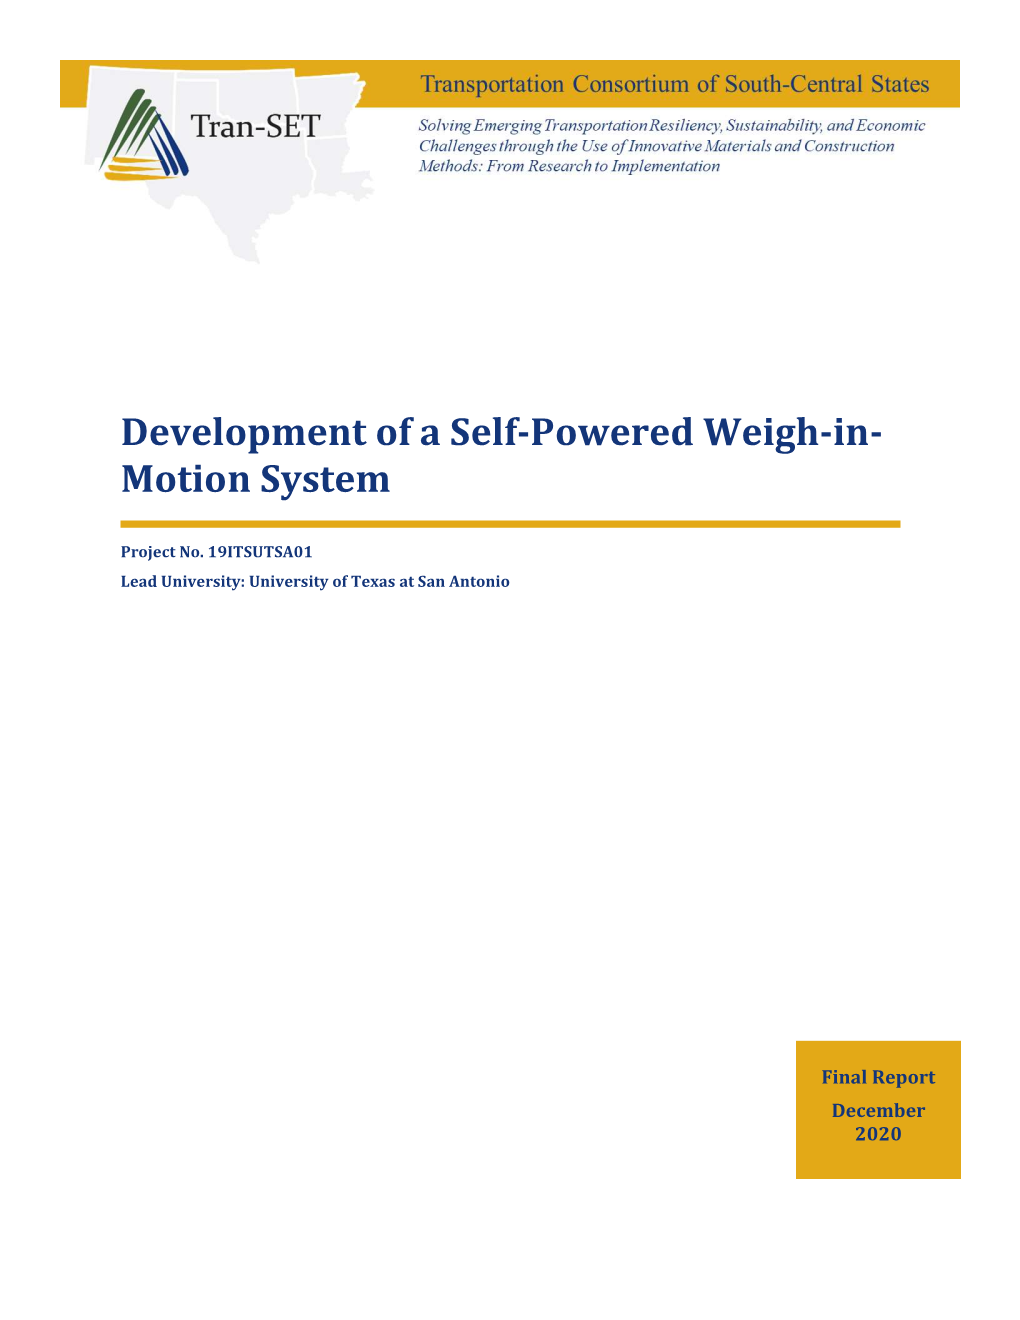 Development of a Self-Powered Weigh-In- Motion System